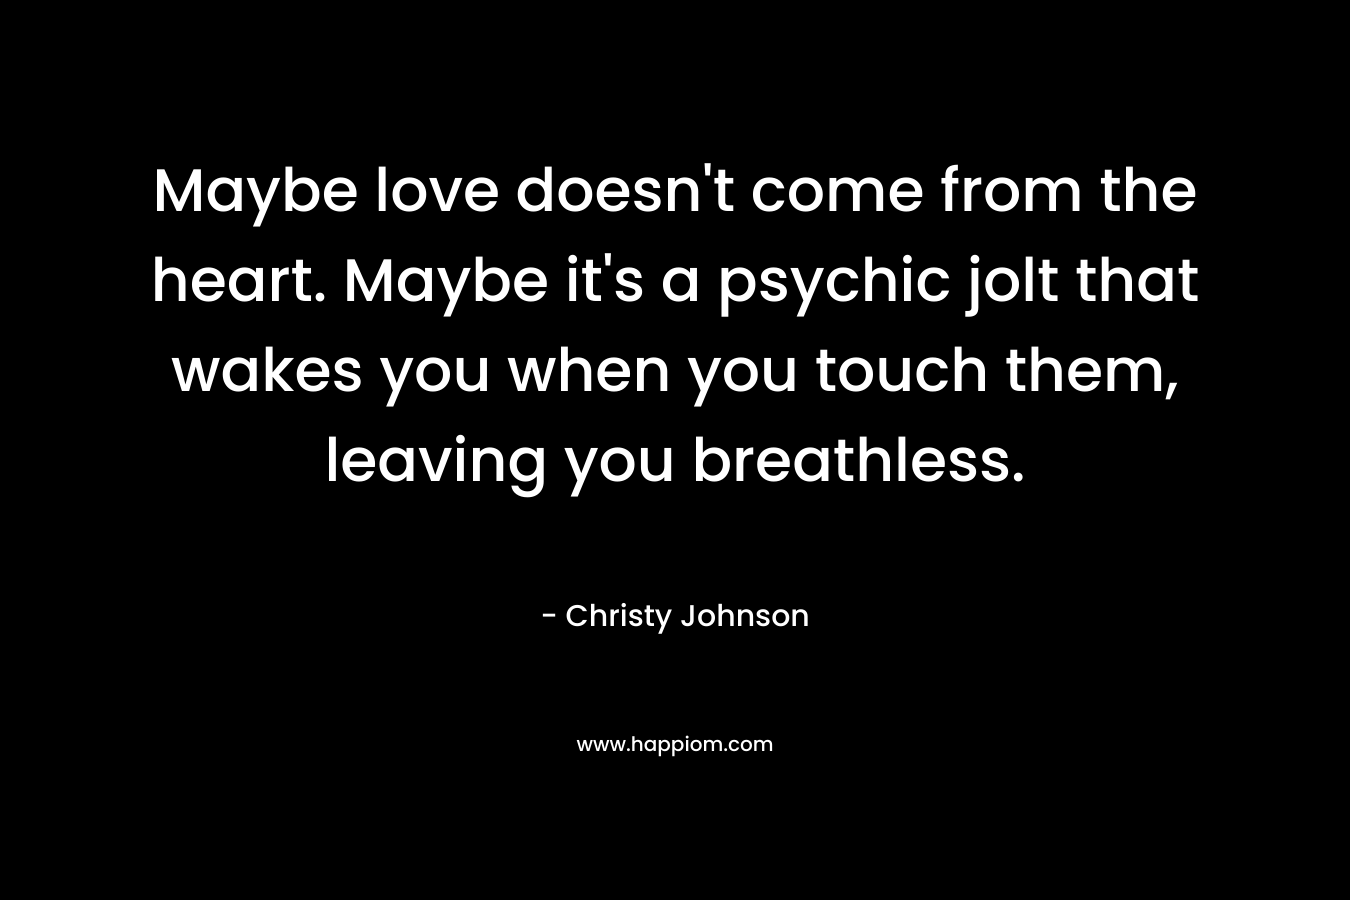 Maybe love doesn't come from the heart. Maybe it's a psychic jolt that wakes you when you touch them, leaving you breathless.